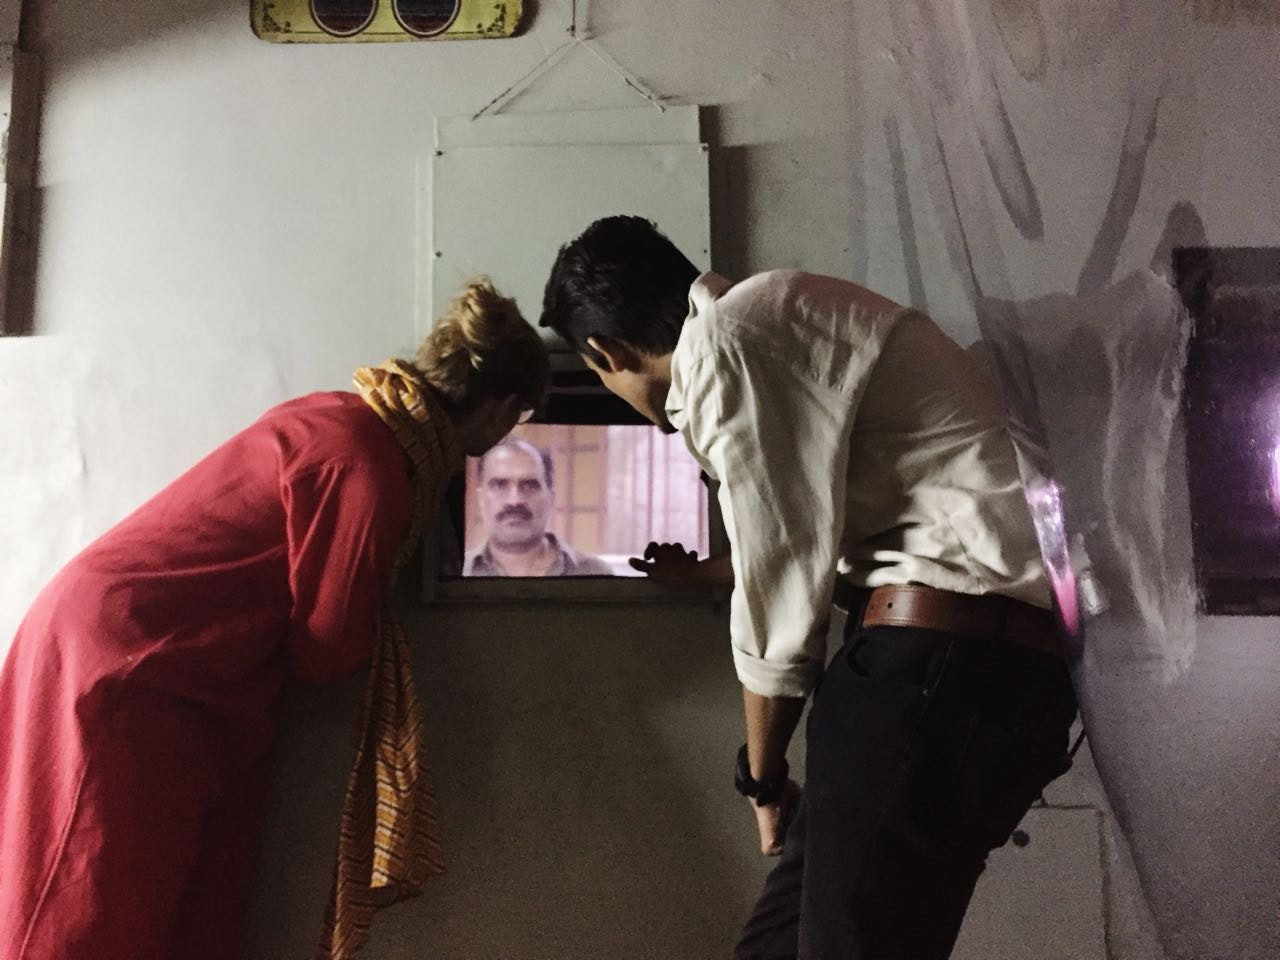 A female-presenting figure in a yellow striped scarf and long red dress, and a male-presenting figure in a white button-up shirt and black trousers, both leaning over to watch a small video screen of a man's face.